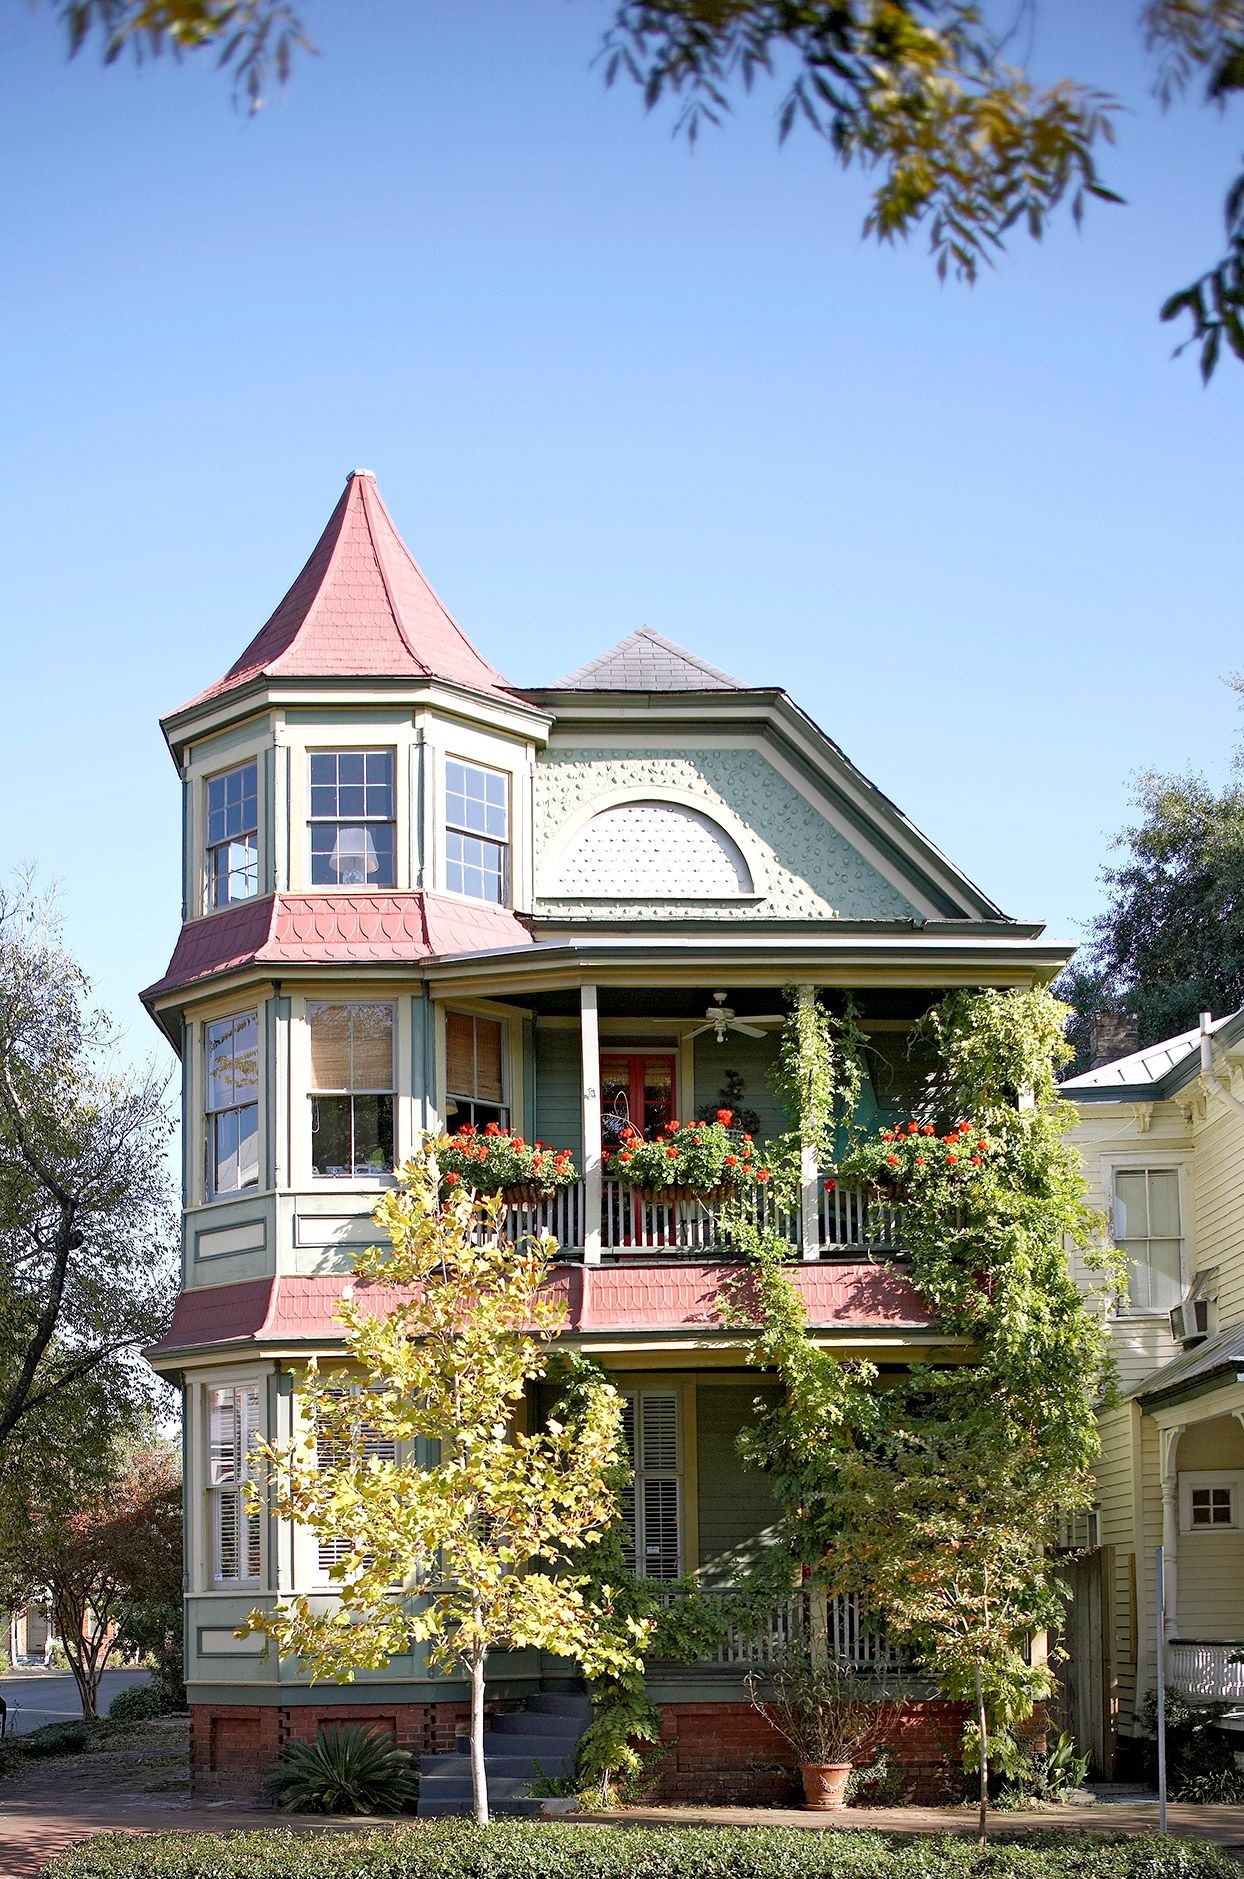 Victorian House with Decorative Details